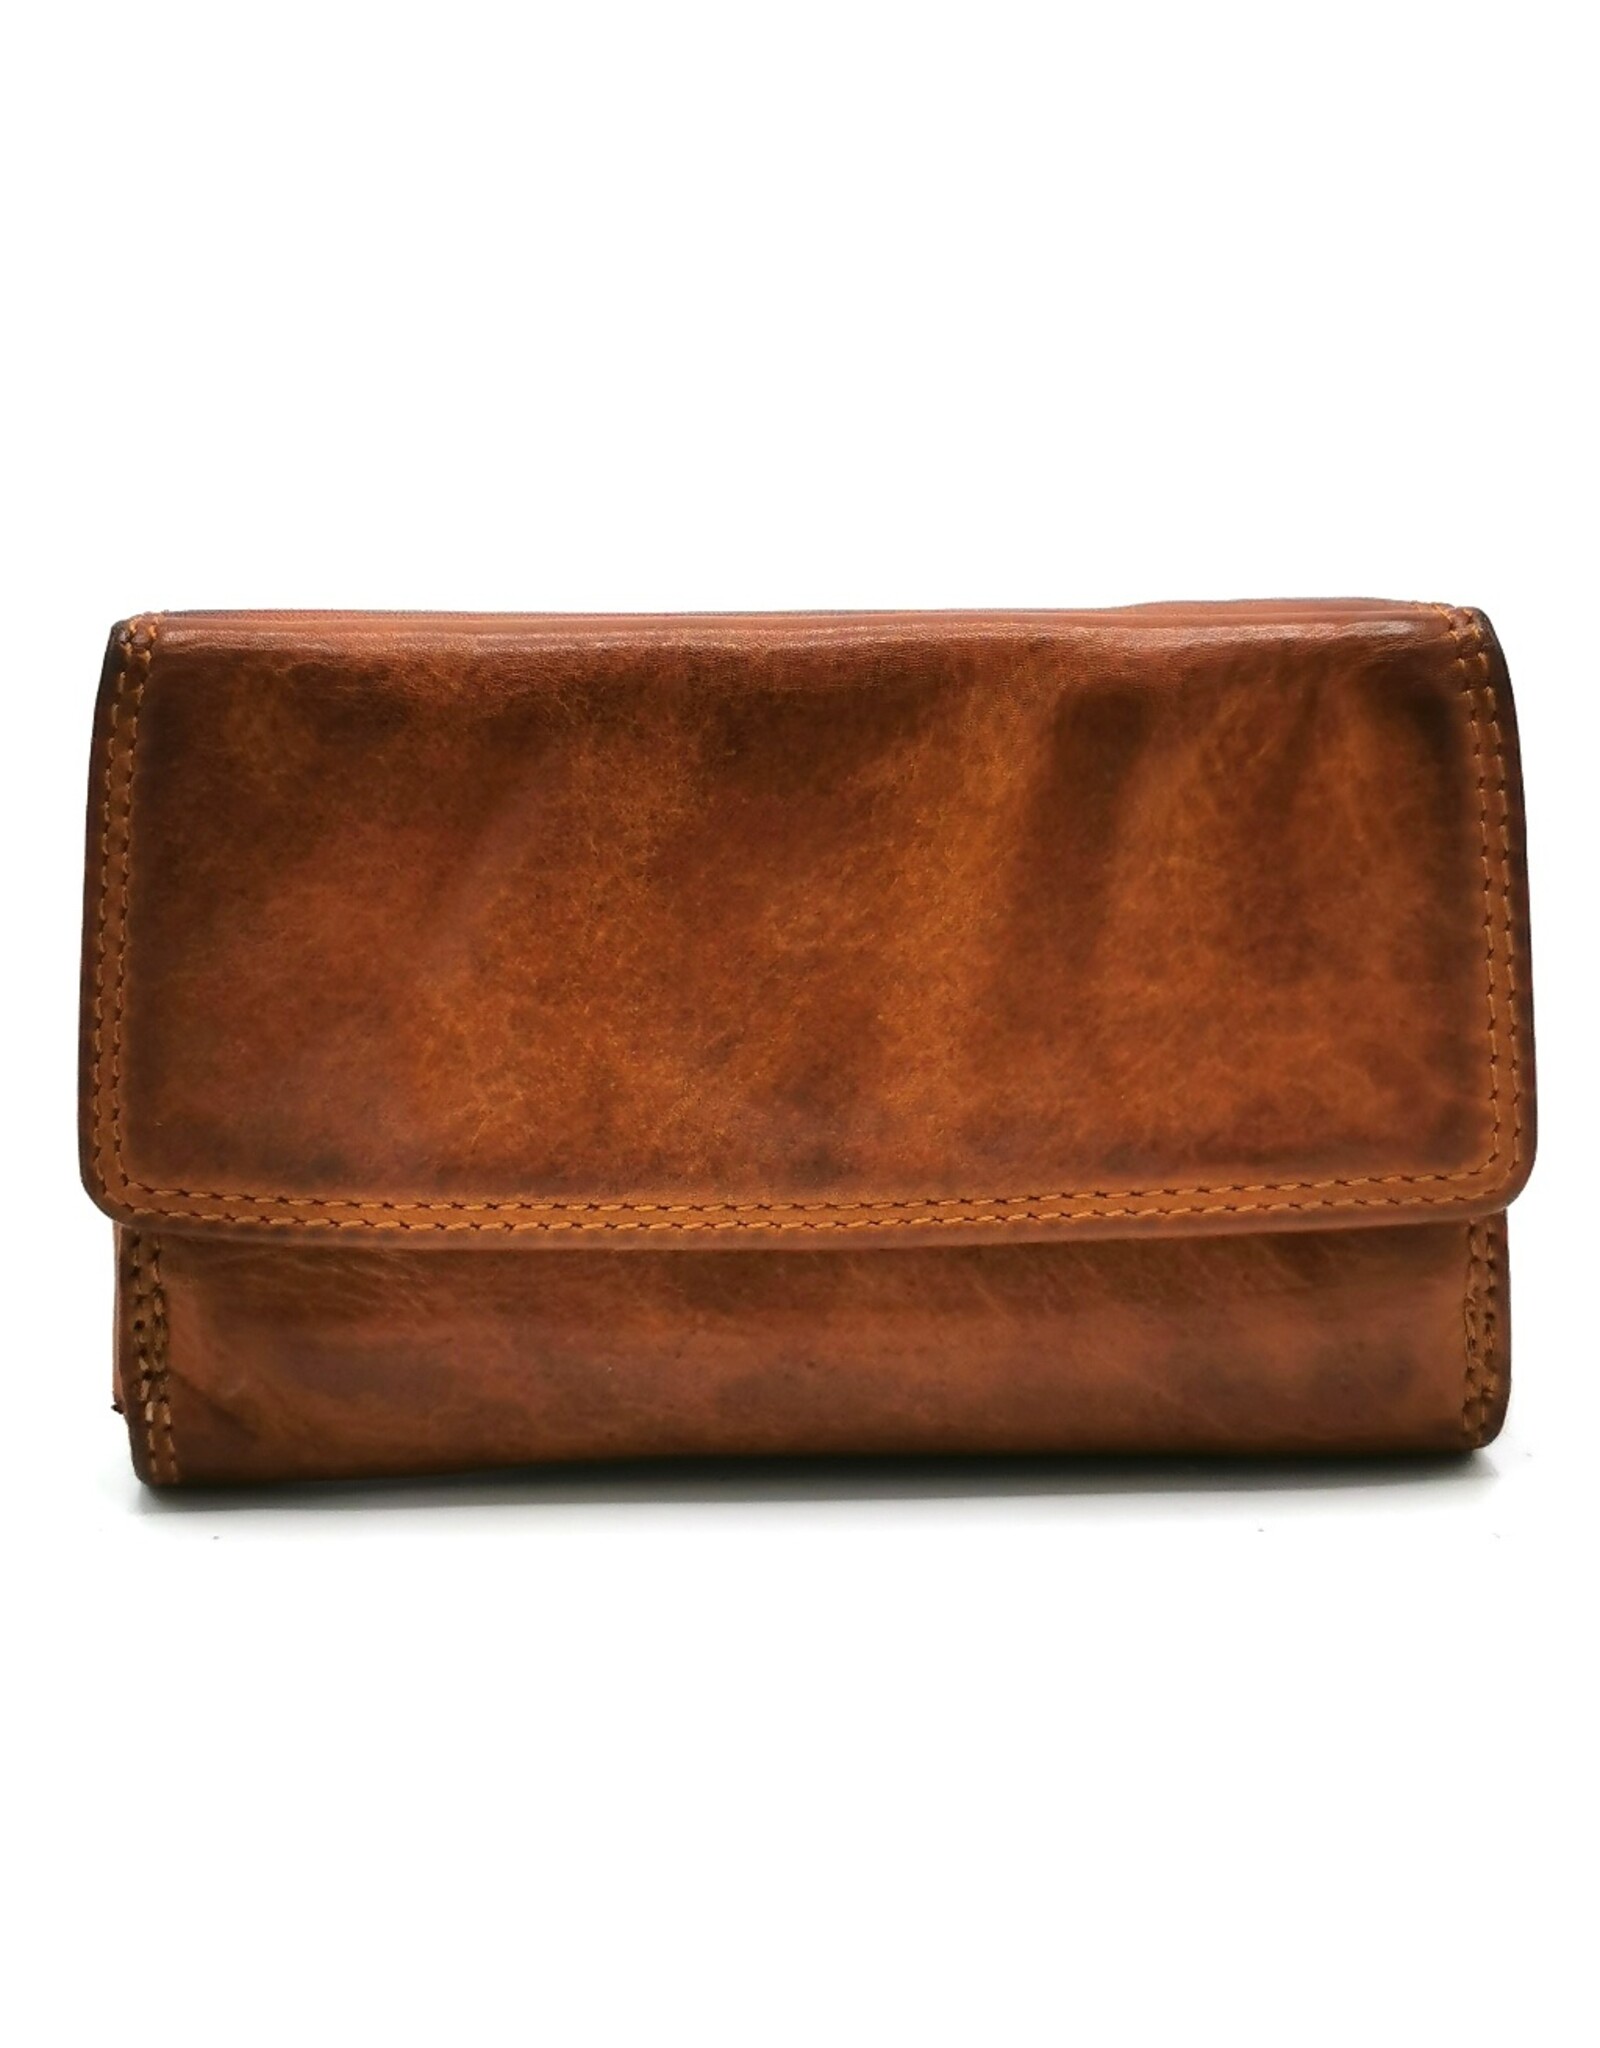 HillBurry Leather wallets - Hillburry Wallet Vintage Washed Leather cognac